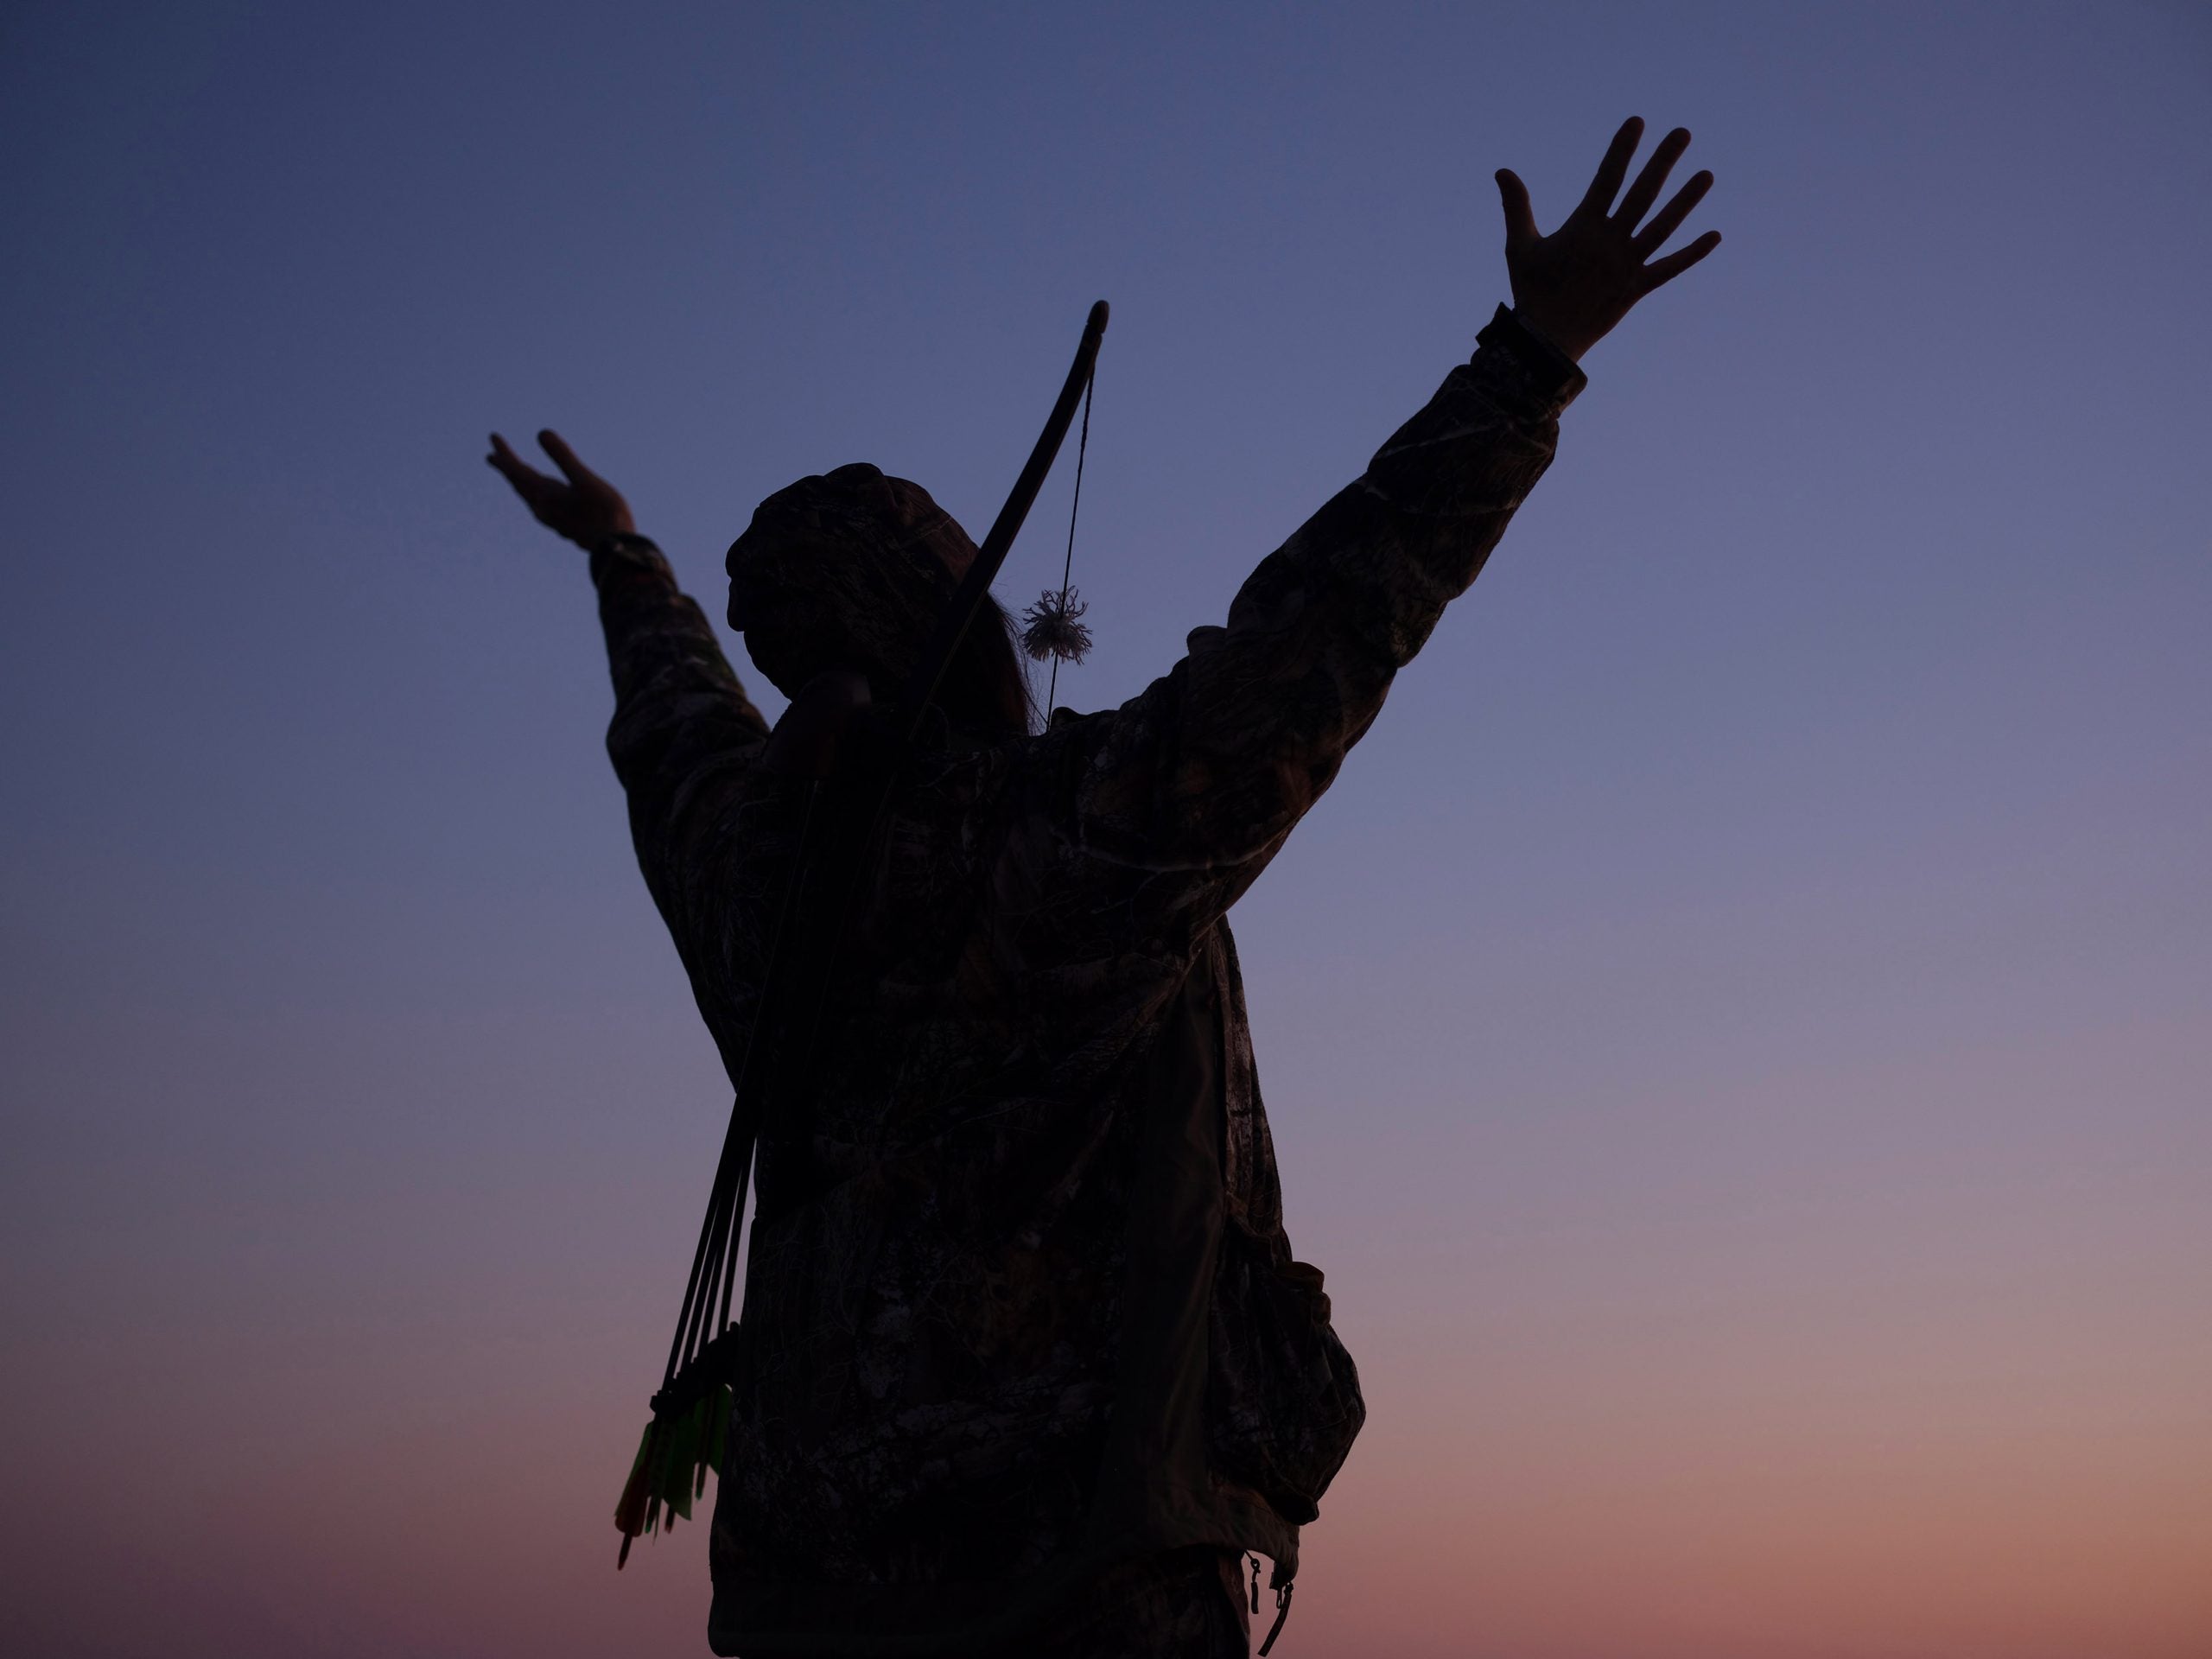 A silhouetted person raising their arms against a blue and orange sky